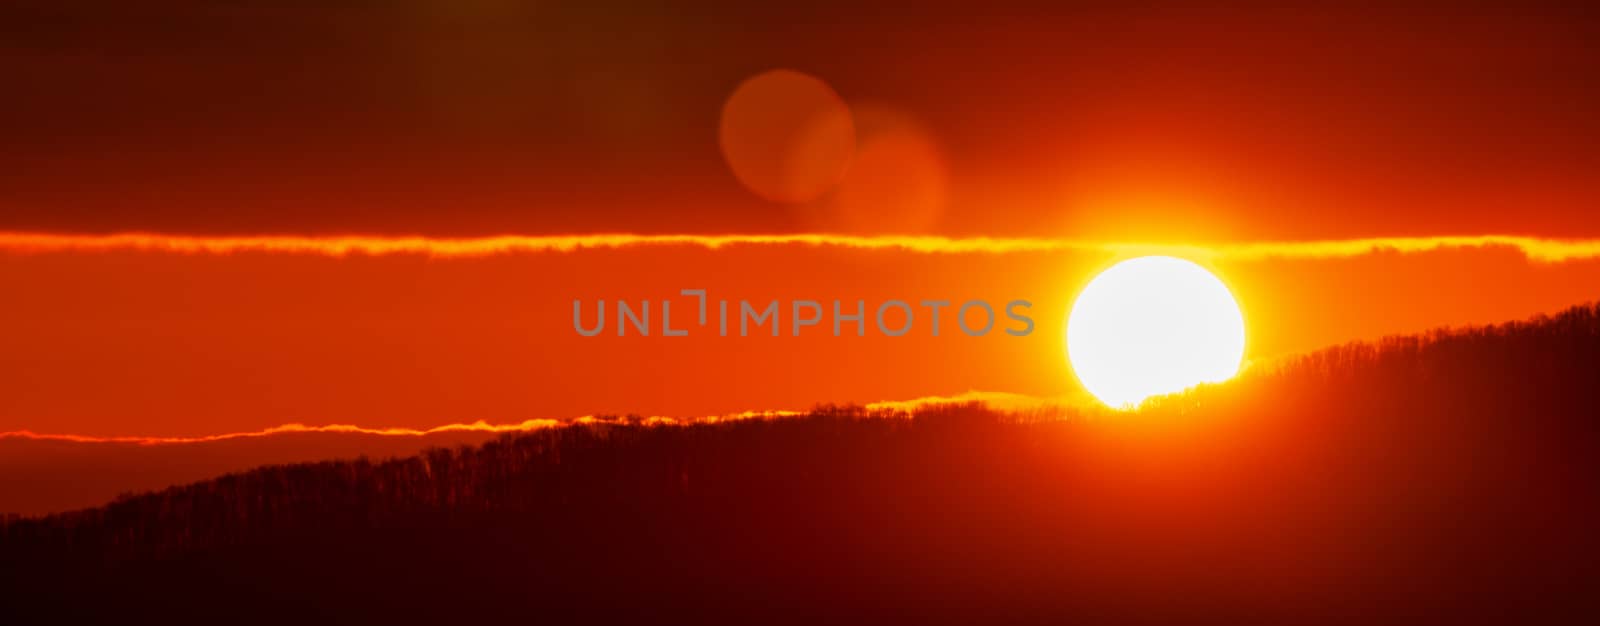 Amazing sunrise in mountains, sunny disk rises from tops of hill. Natural lens flare in sky, sunbeam light leaks. Early morning weather, nature and environment panoramic landscape.